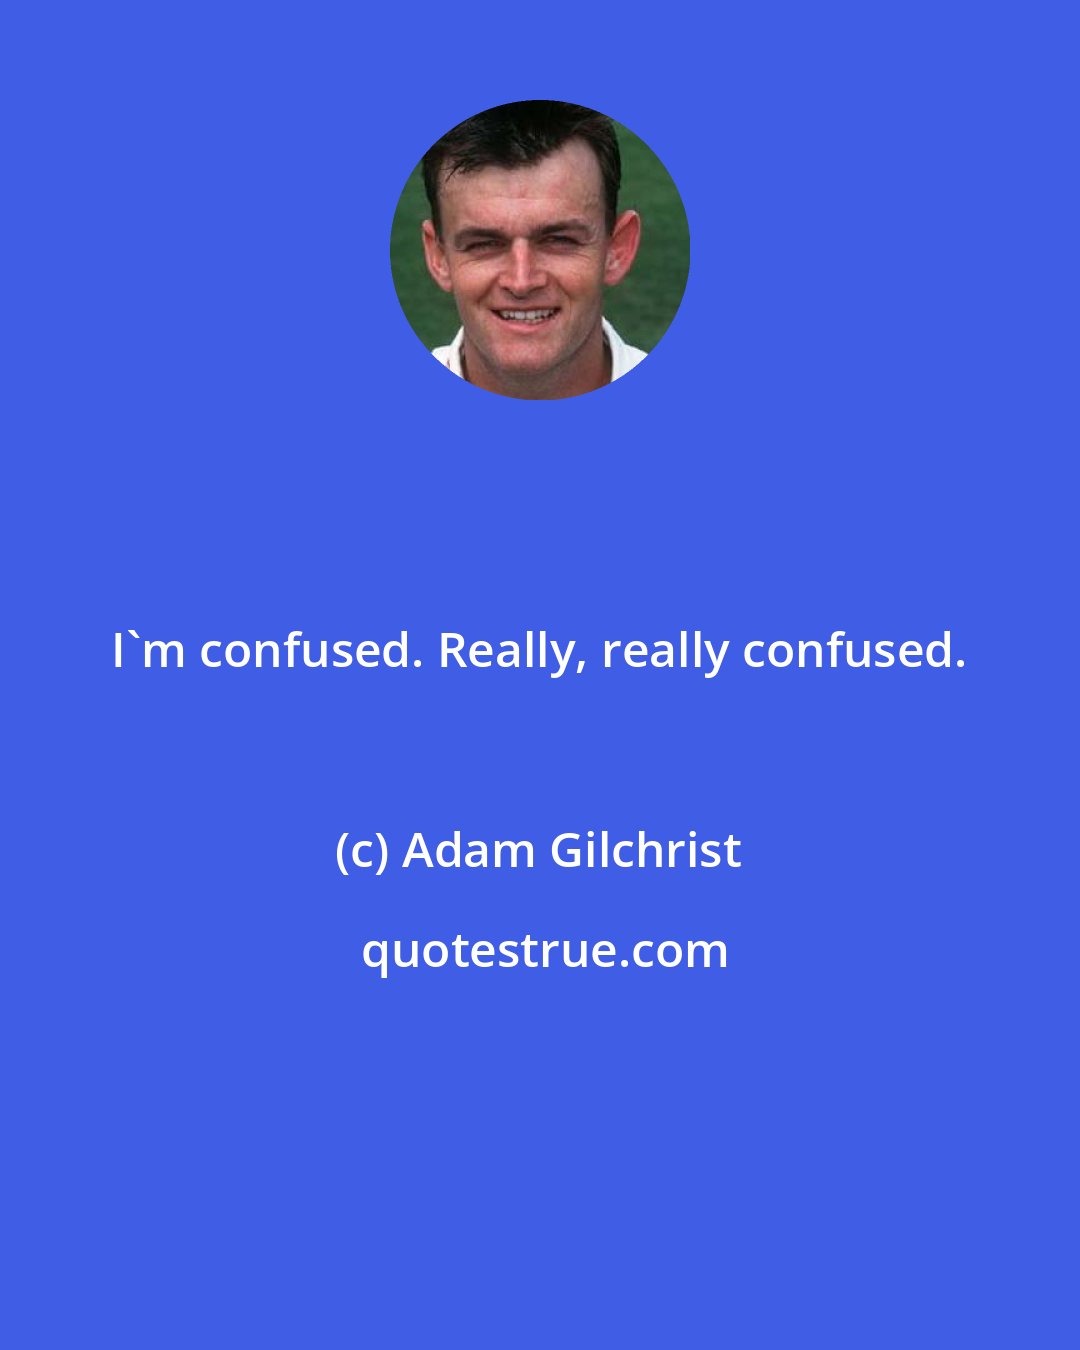 Adam Gilchrist: I'm confused. Really, really confused.